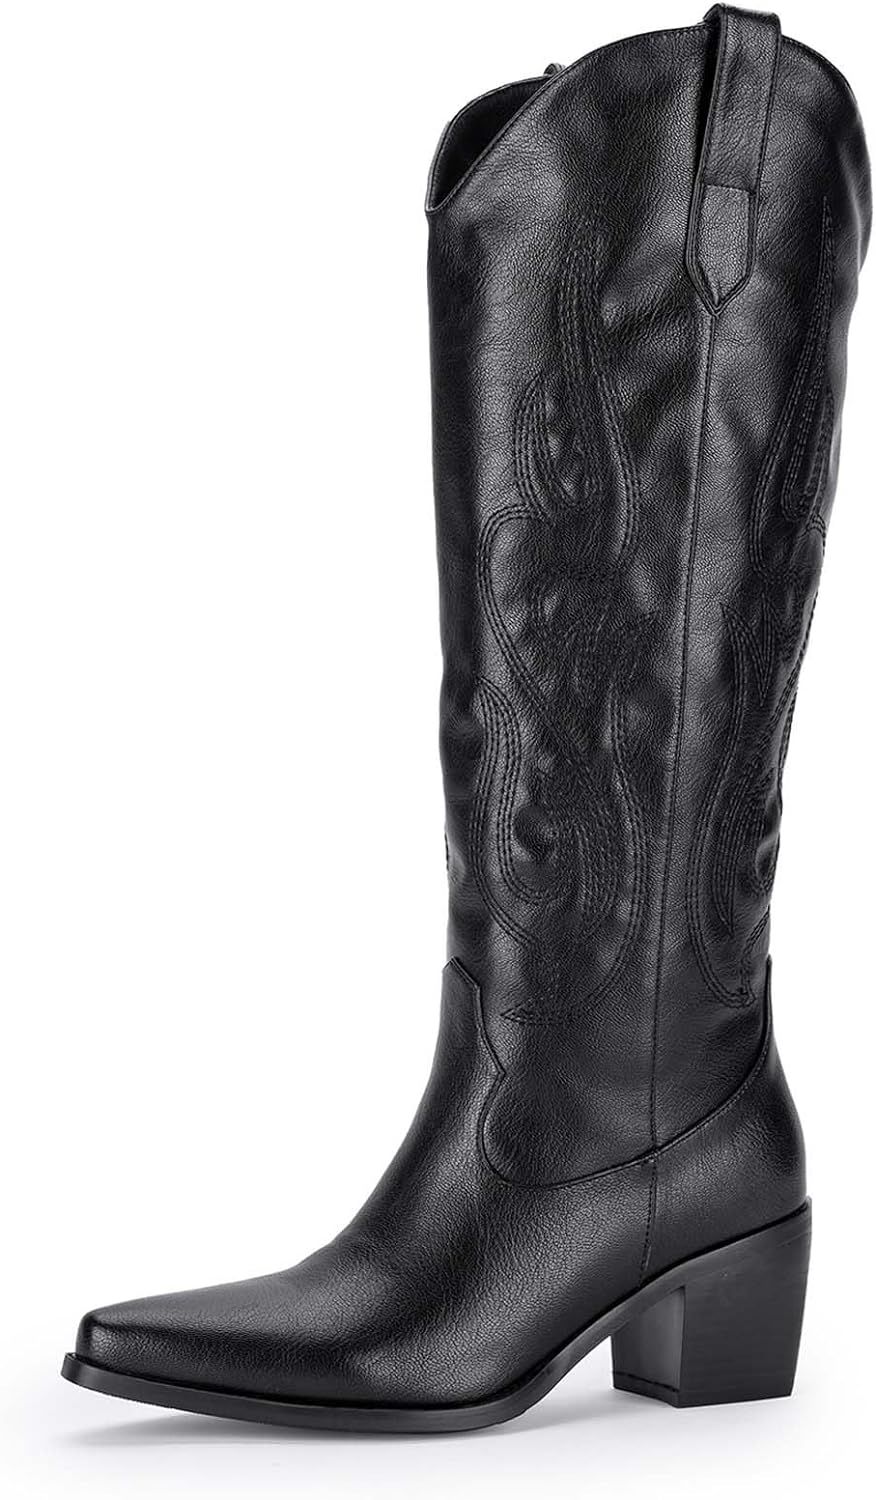 Pasuot Cowboy Boots for Women - Black Knee High Cowgirl Western Boots with Western Embroidered, W... | Amazon (US)